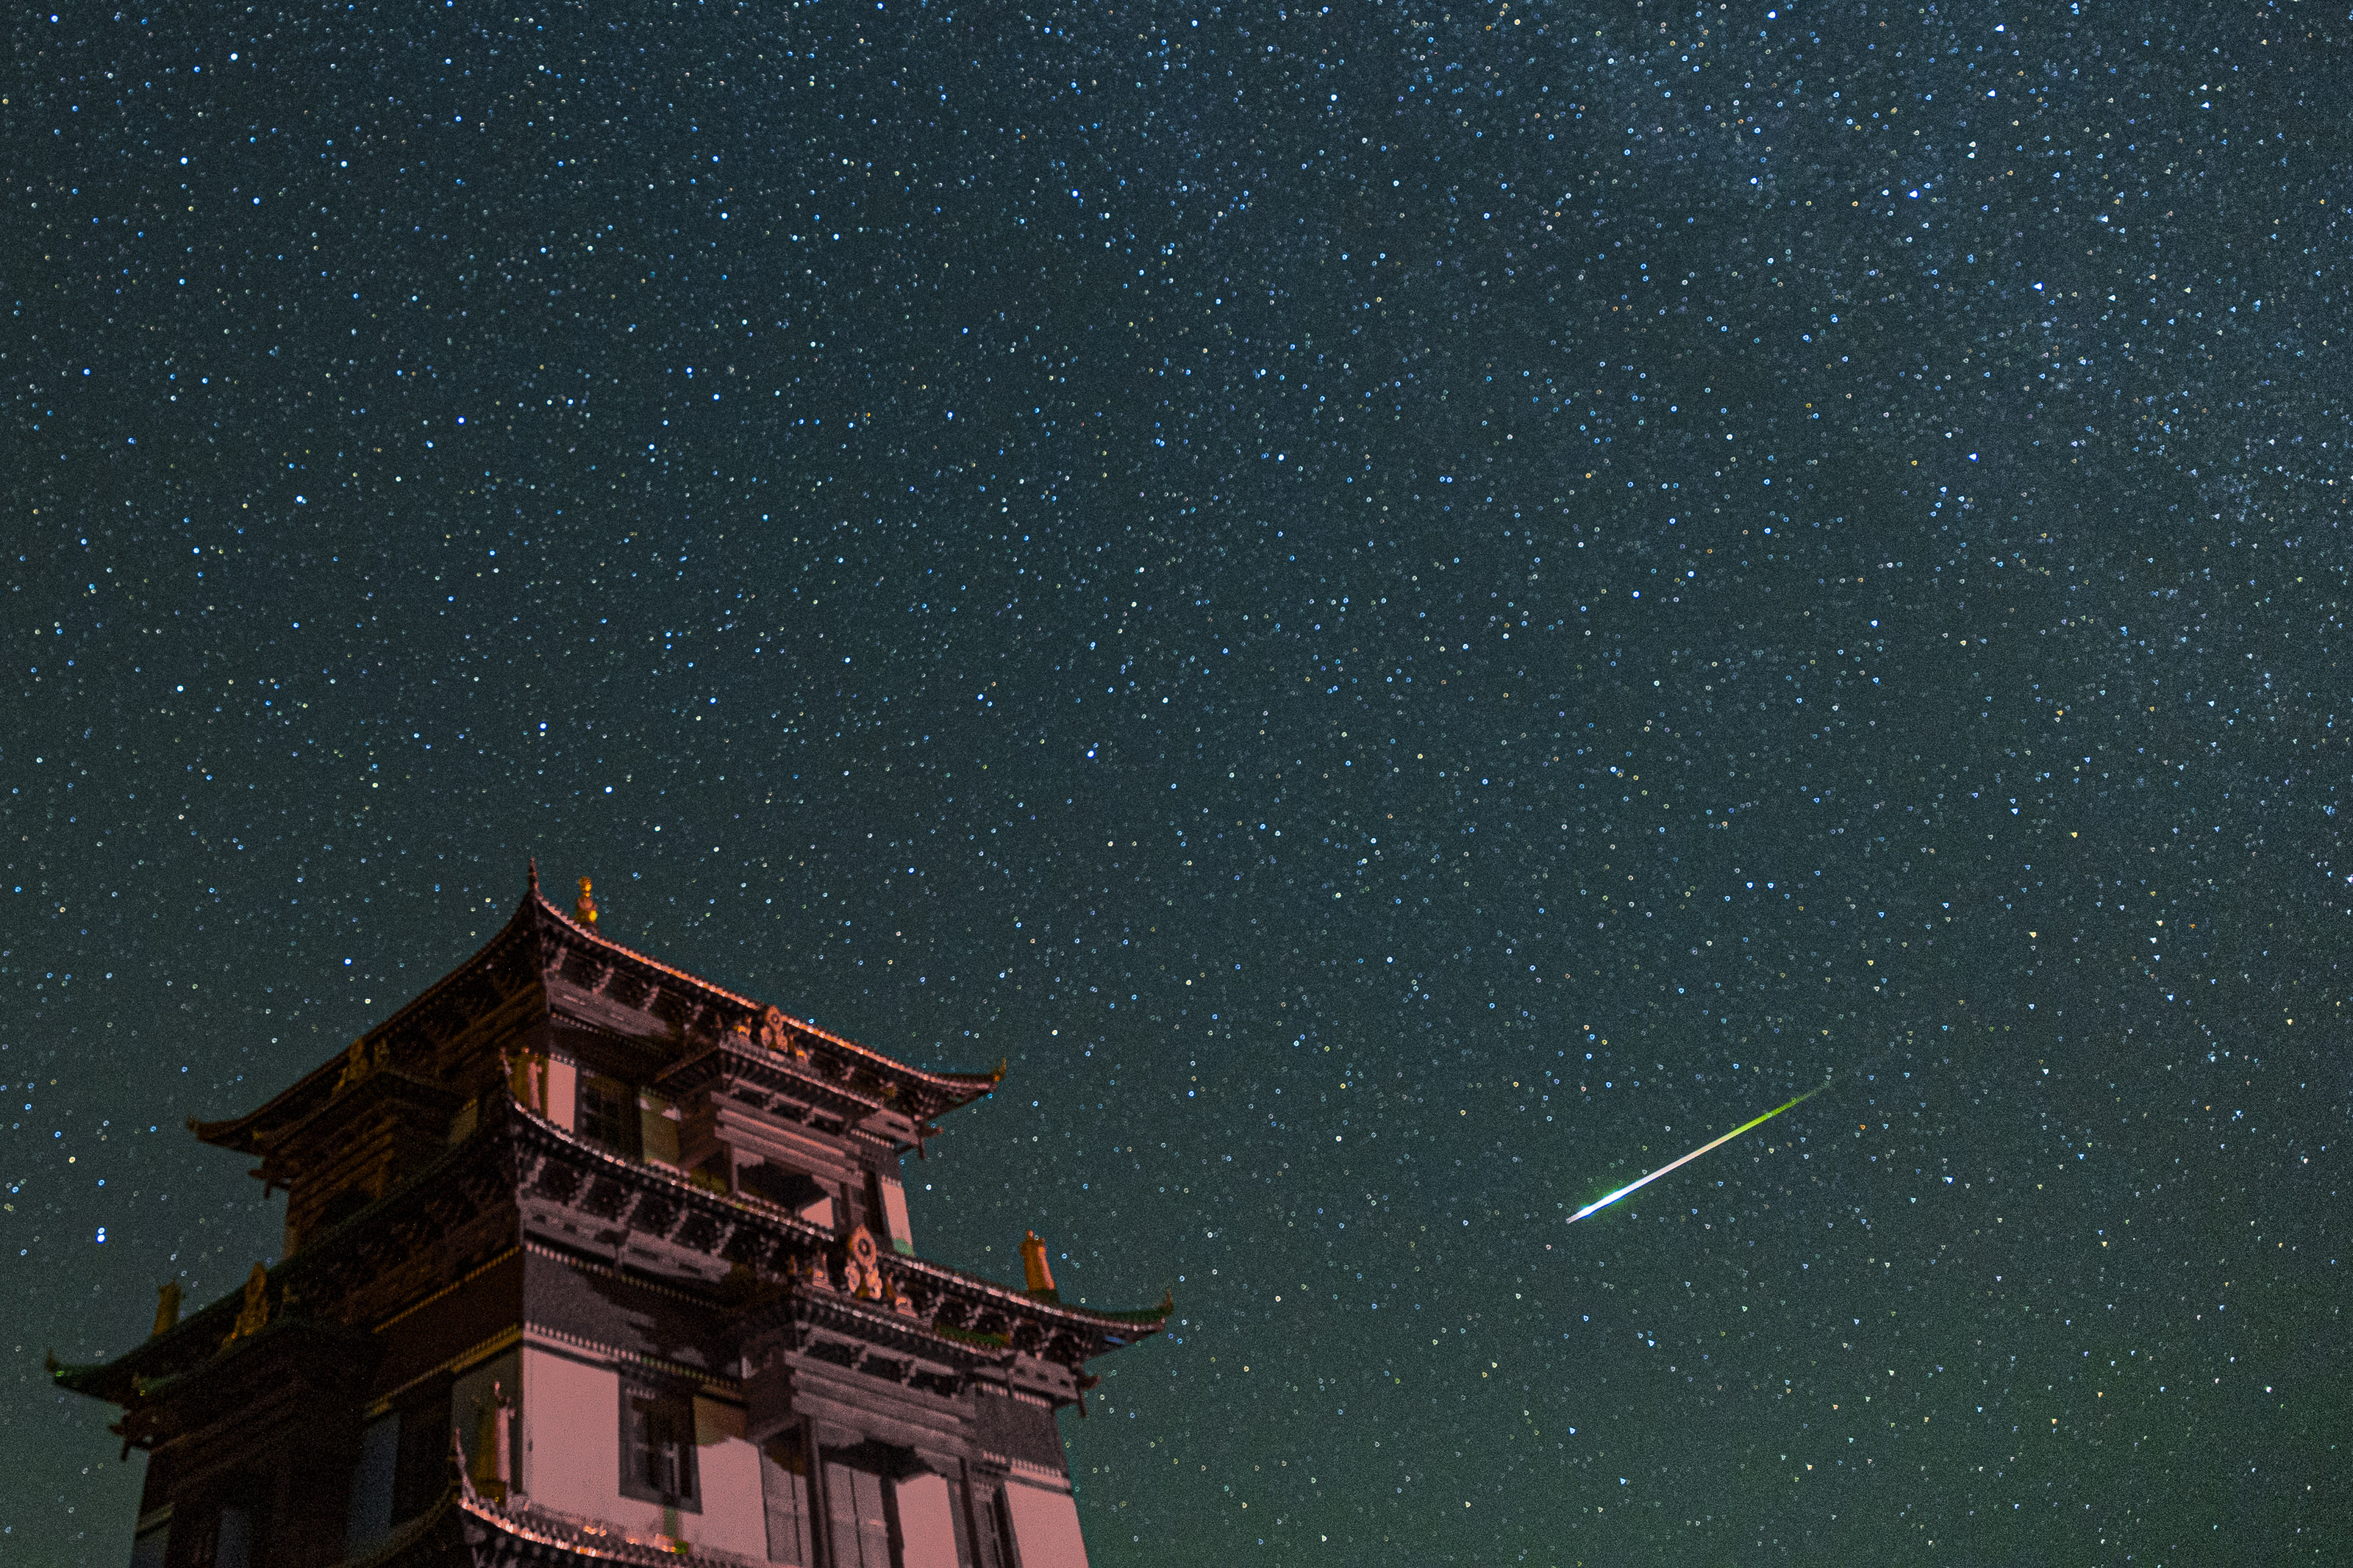 A large building on the left and a bright white meteor streaking across the starry sky.